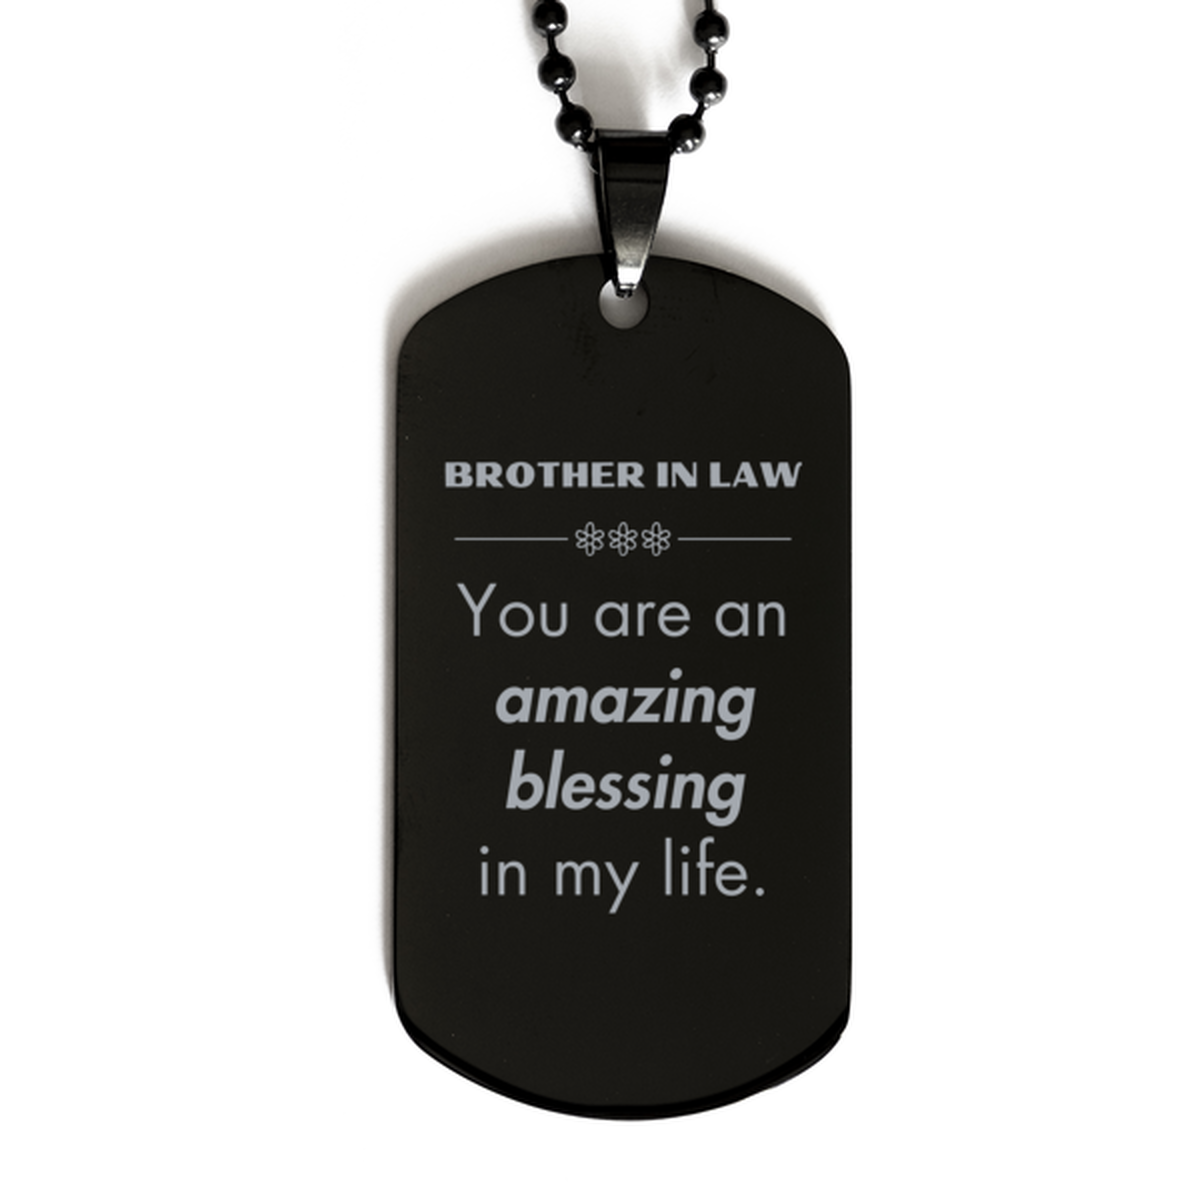 Brother In Law Black Dog Tag, You are an amazing blessing in my life, Thank You Gifts For Brother In Law, Inspirational Birthday Christmas Unique Gifts For Brother In Law